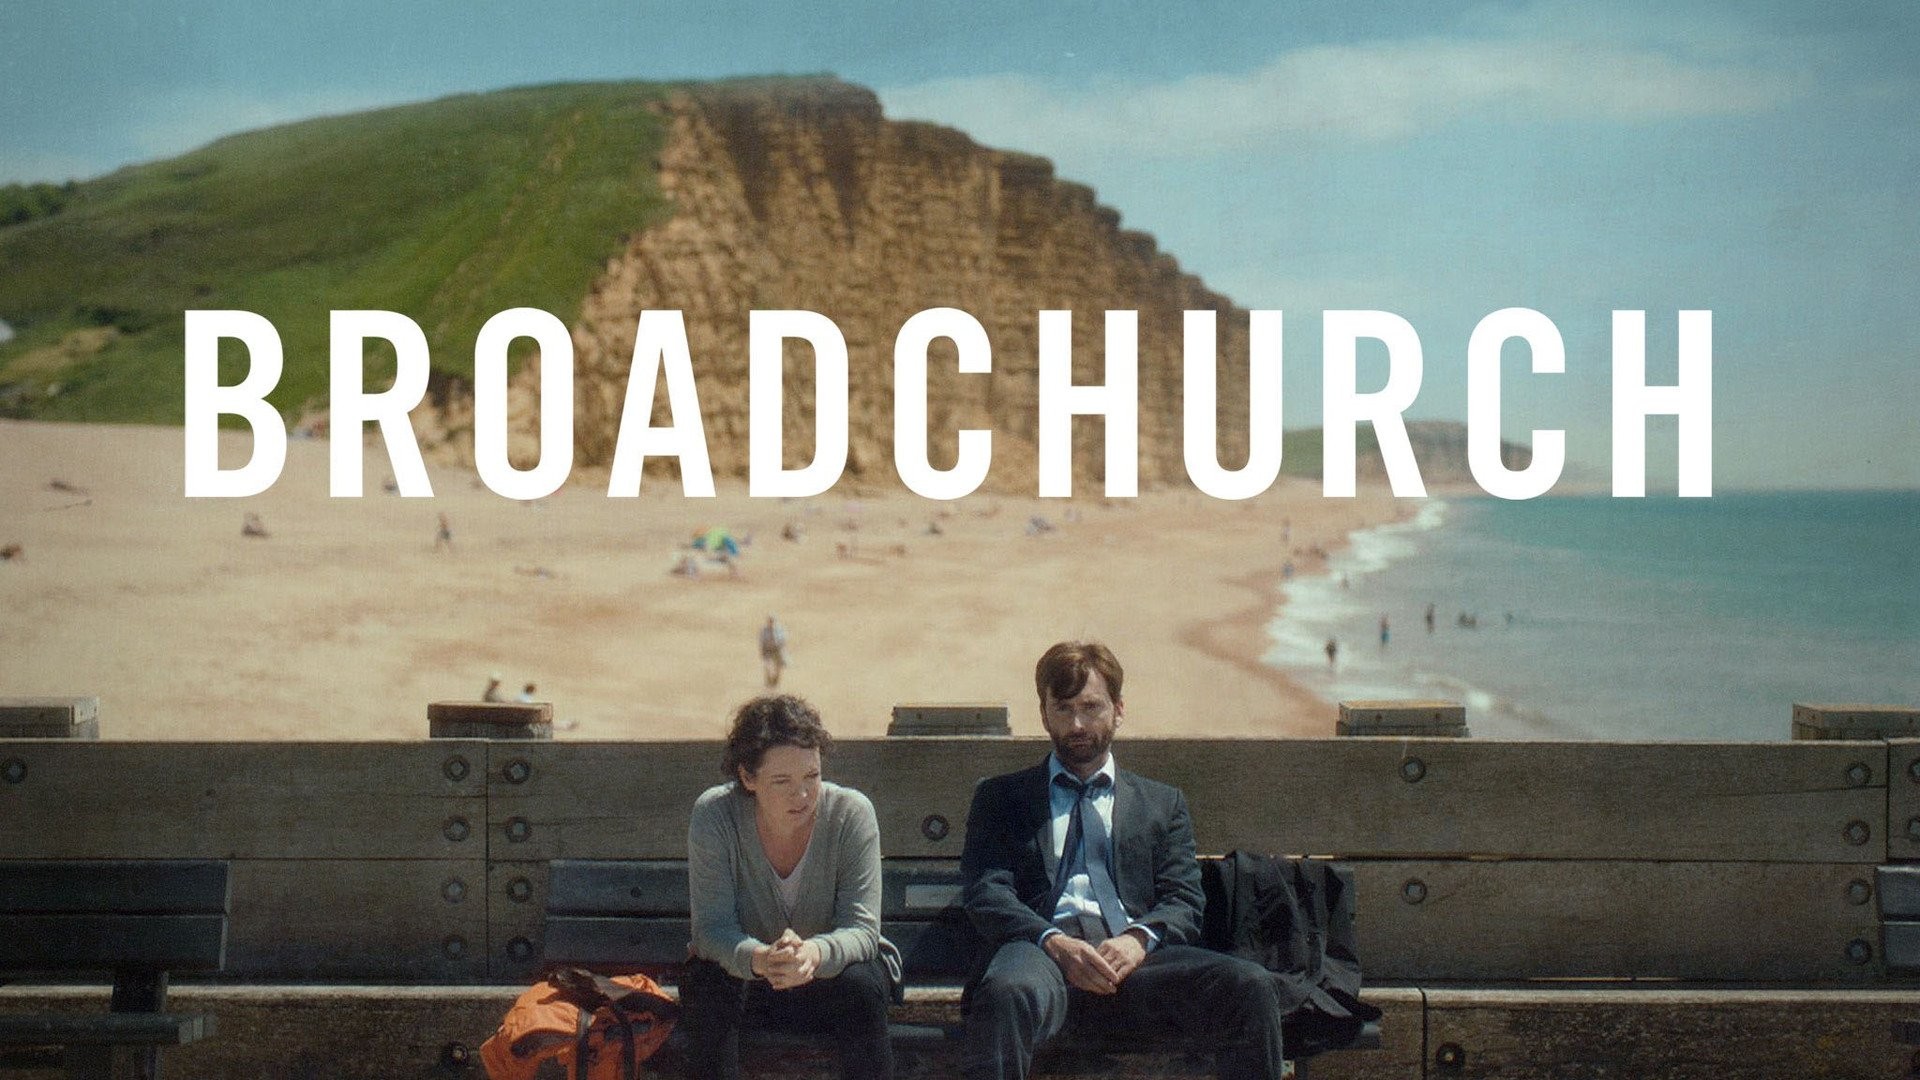 Crime Drama Shows To Watch If You Liked 'Broadchurch' – FandomWire